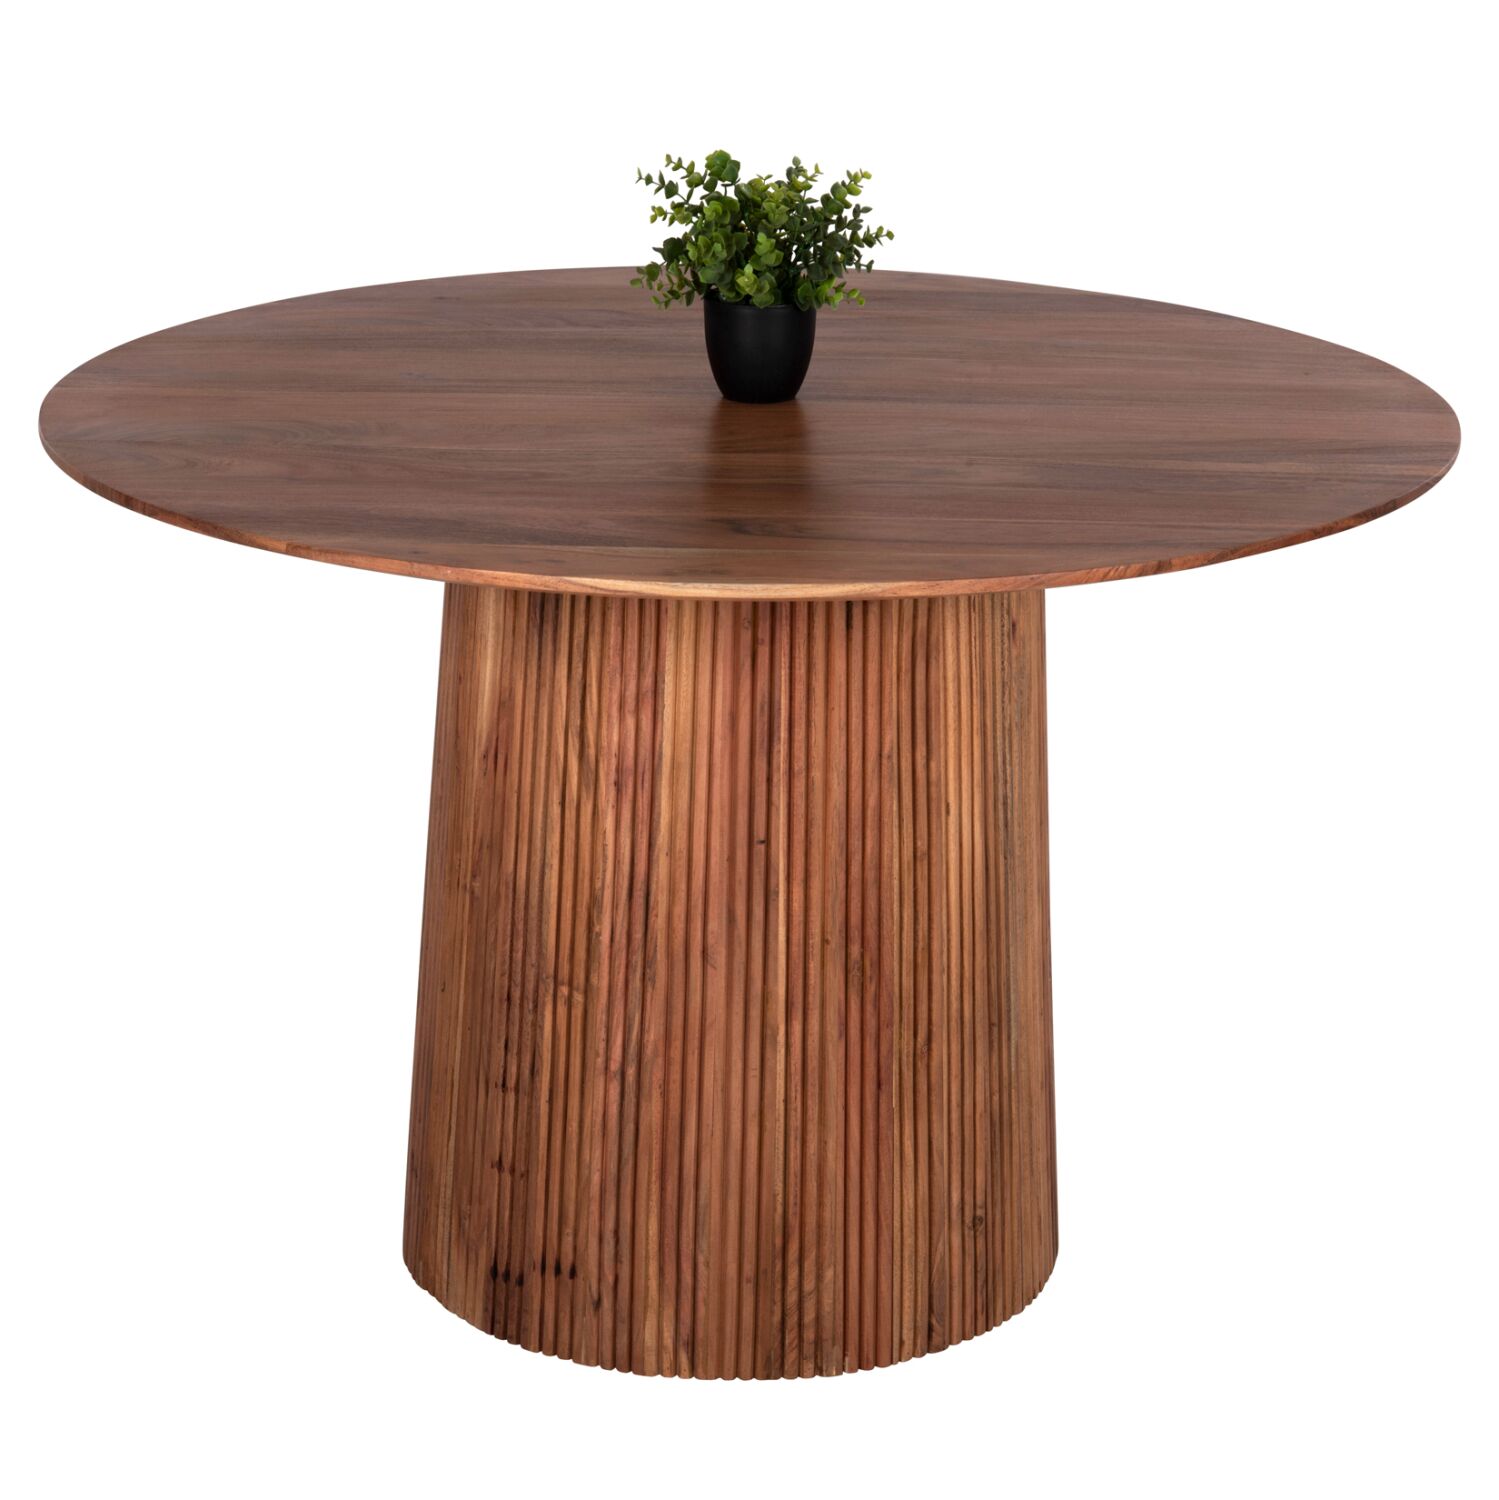 DINING TABLE ROUND GROOT HM9684 SOLID ACACIA WOOD IN NATURAL D120x79Hcm.